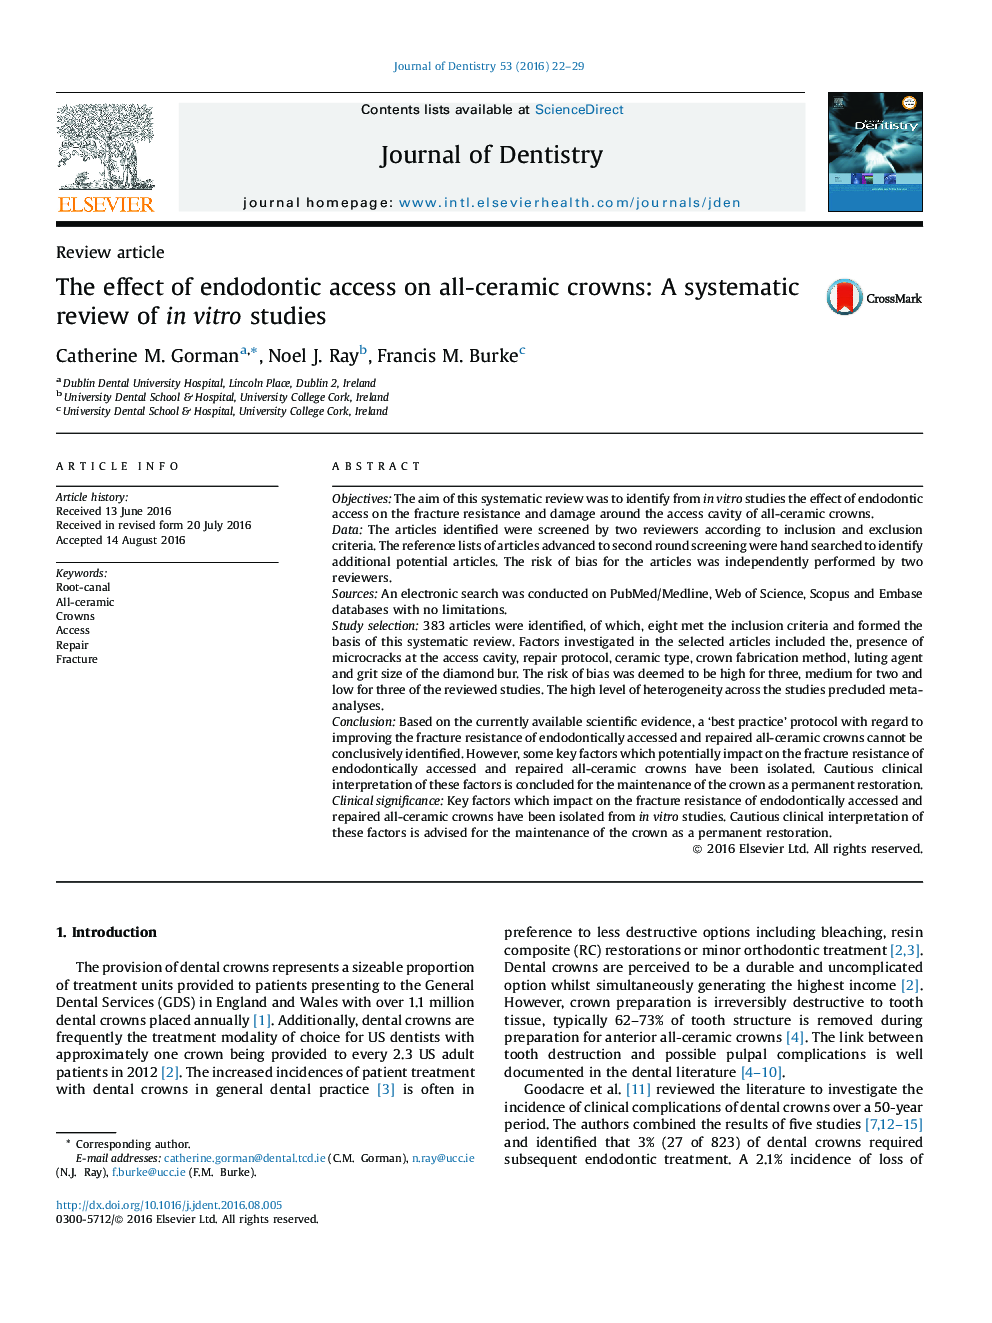 The effect of endodontic access on all-ceramic crowns: A systematic review of in vitro studies